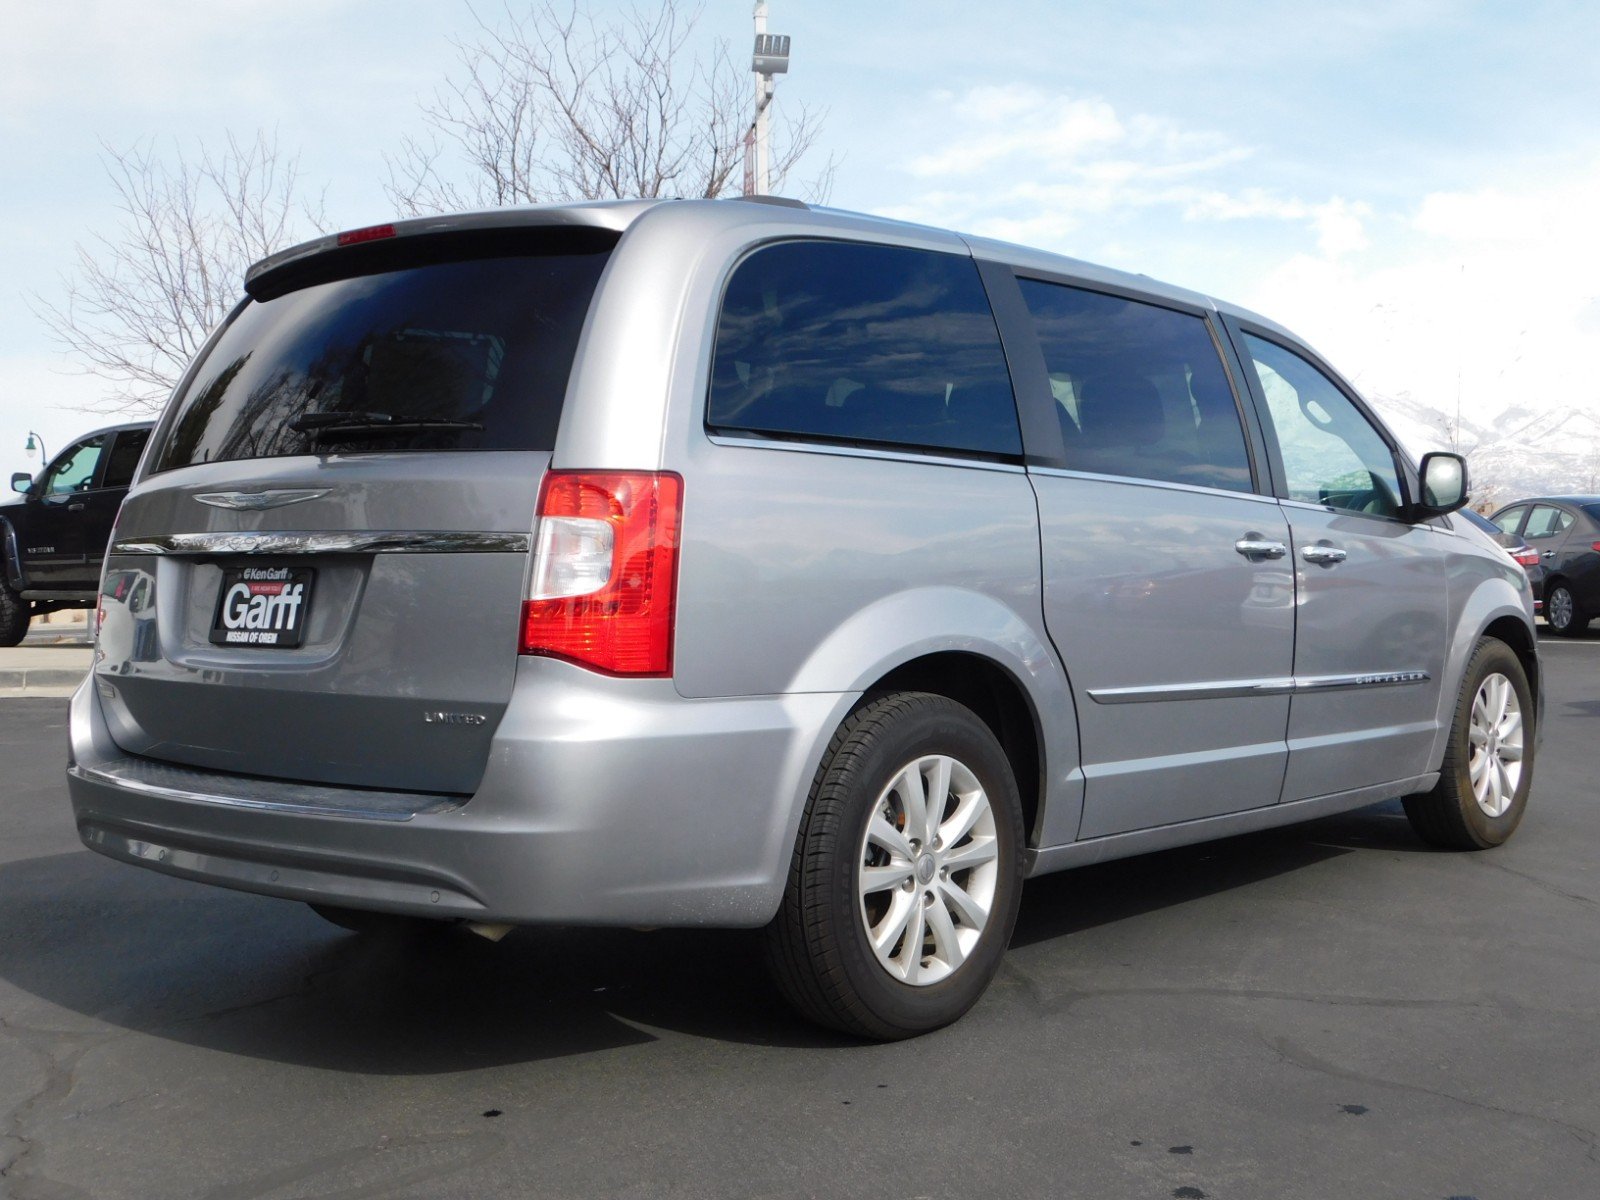 PreOwned 2015 Chrysler Town & Country Limited Platinum